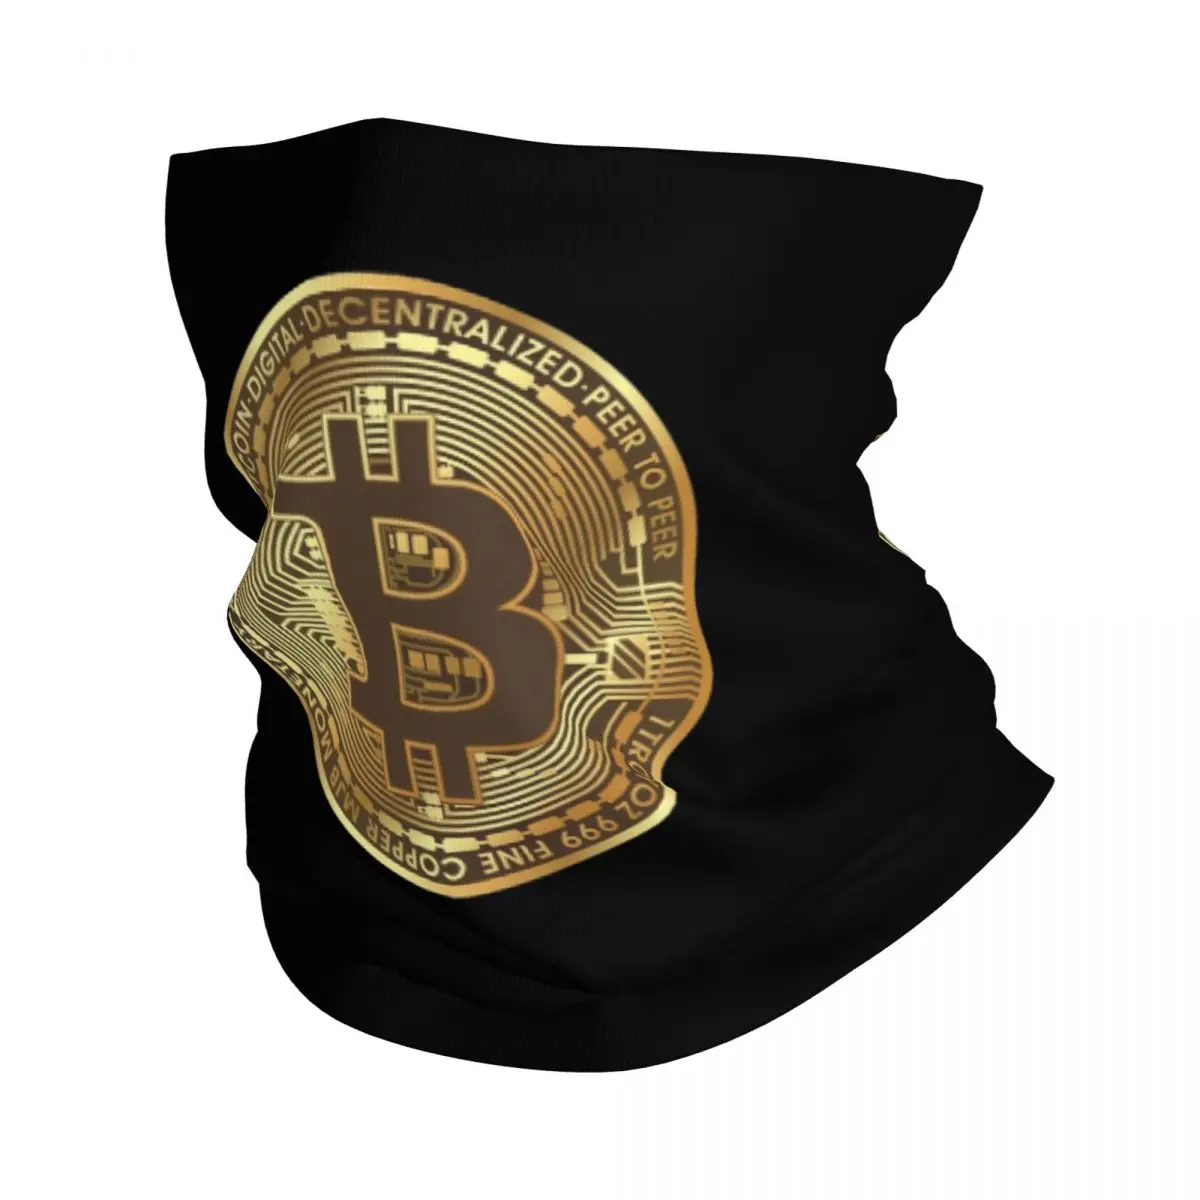 

Crypto BTC Cryptocurrency Bandana Neck Gaiter Printed Bitcoin Mask Scarf Headband Outdoor Sports for Men Women Adult Breathable